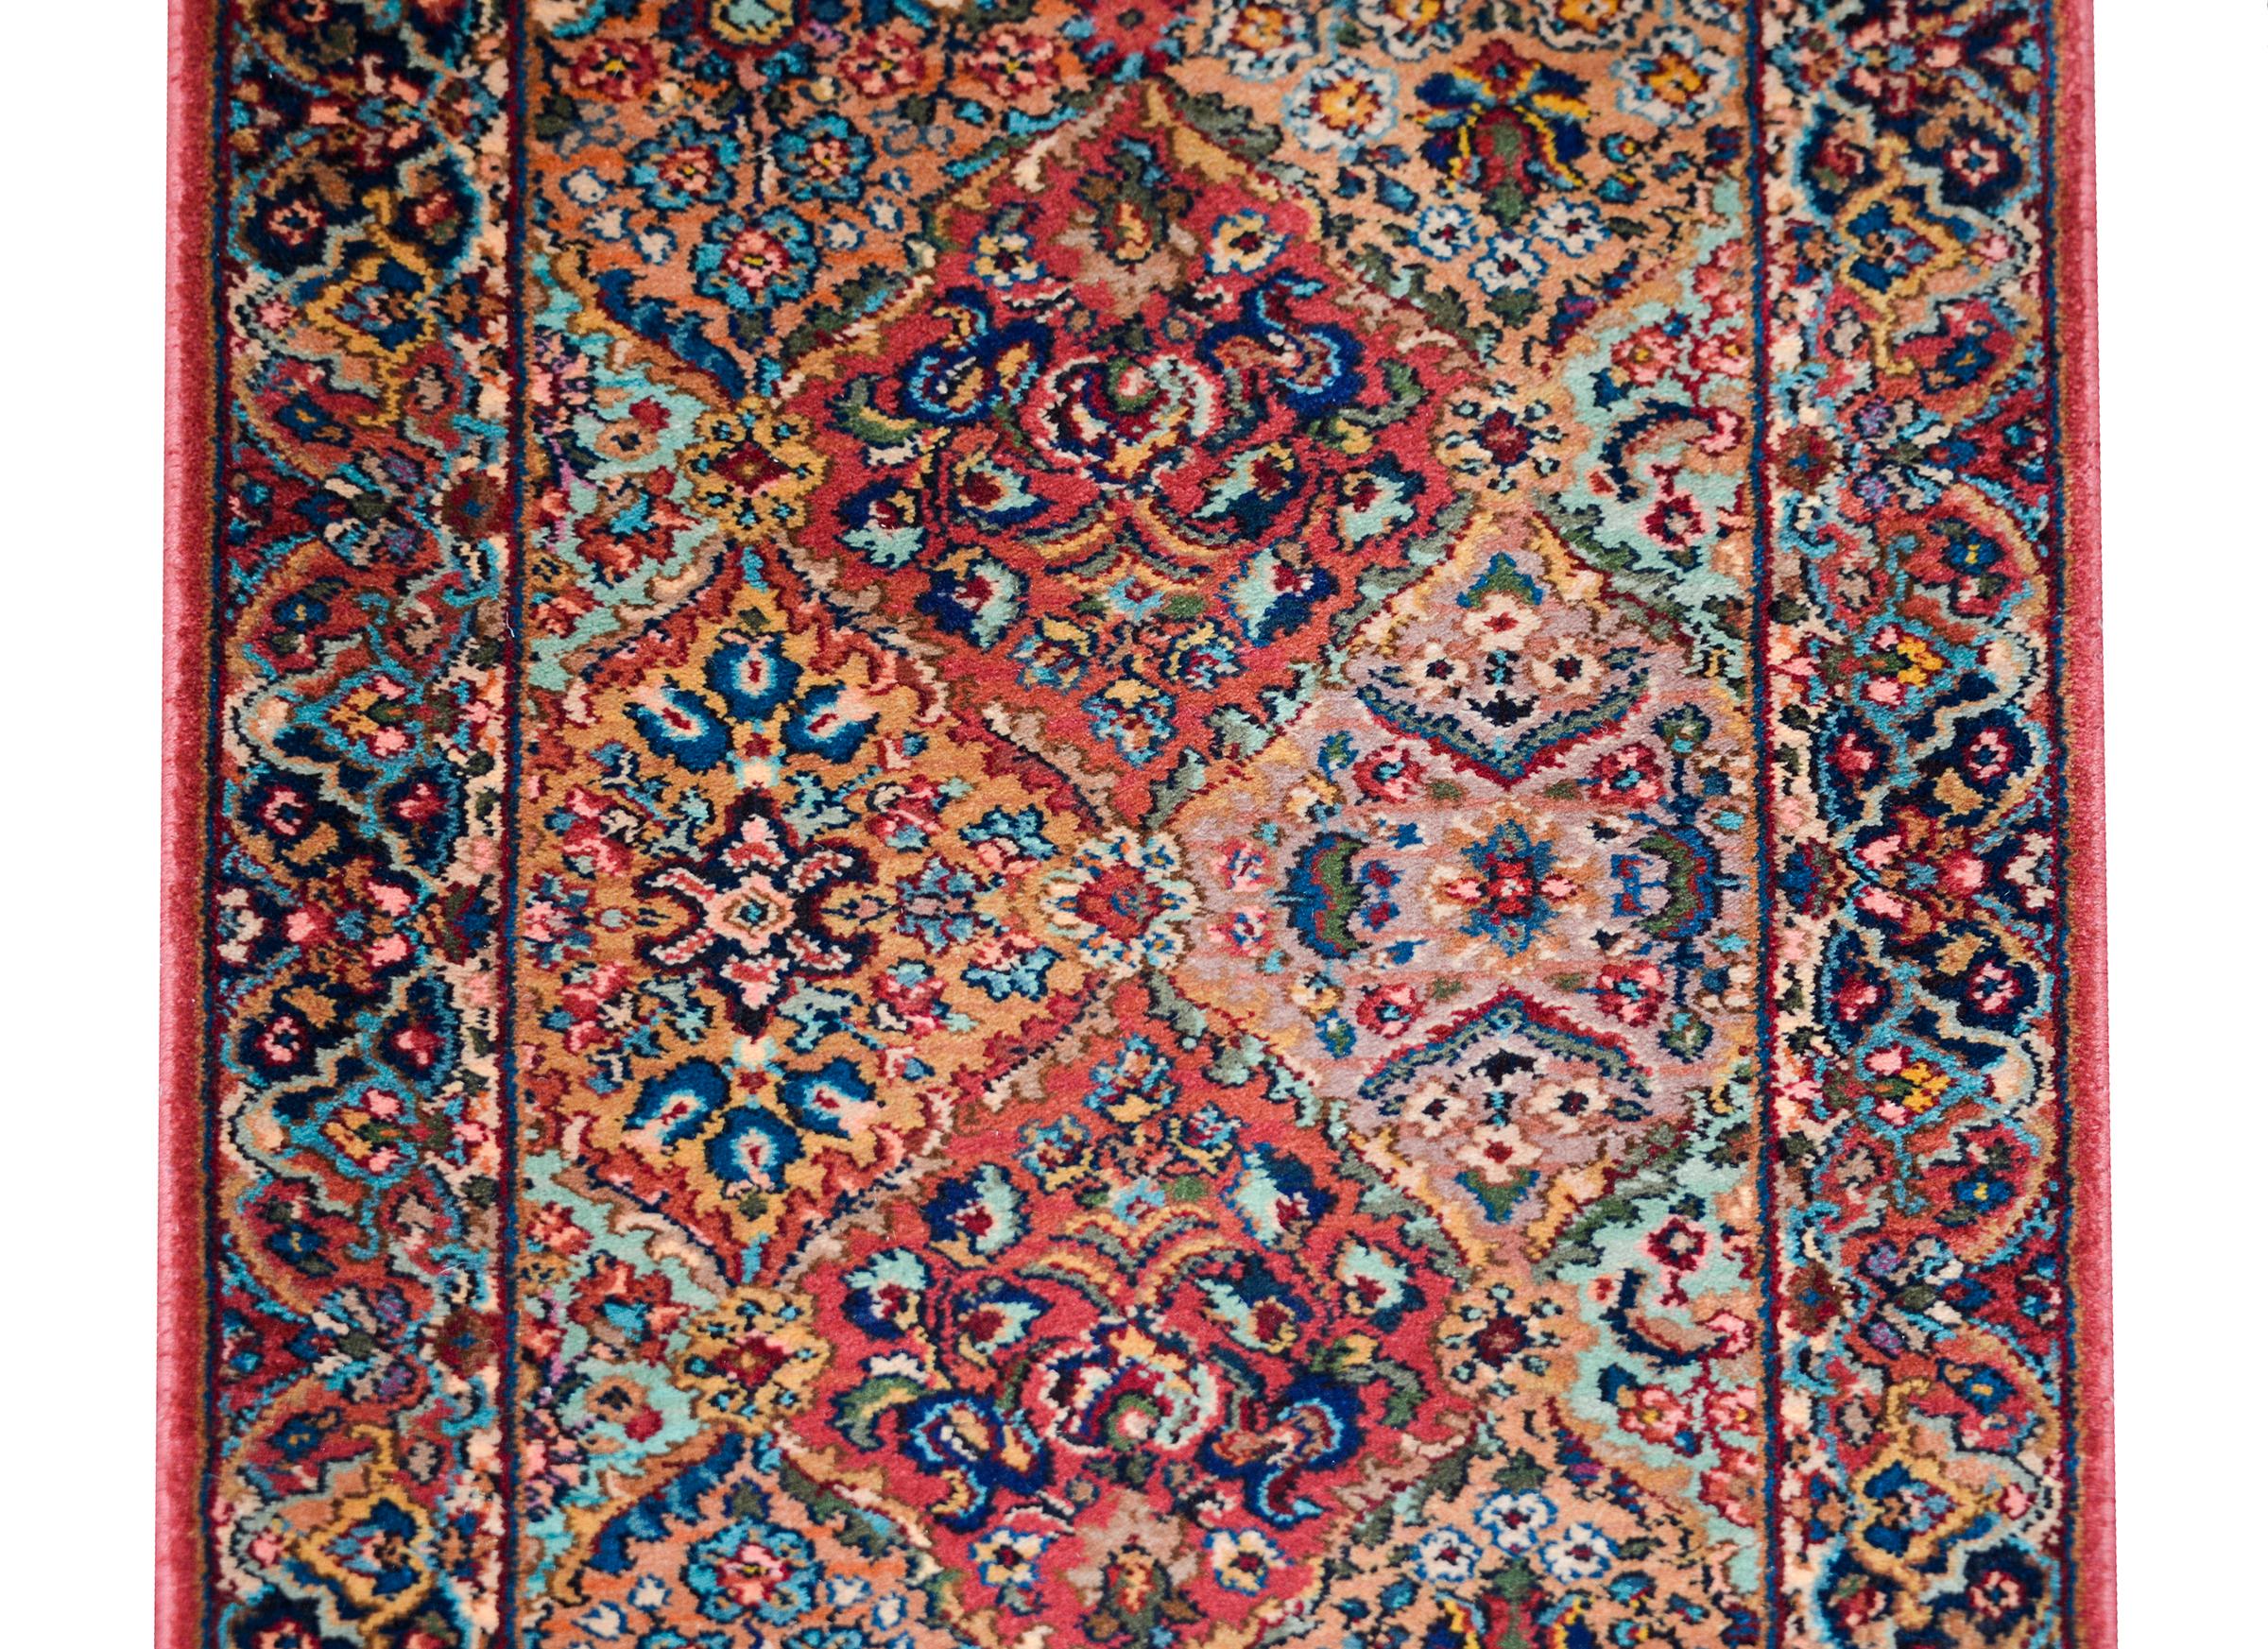 A striking early 20th century Persian Kirman runner with the best pattern in pattern containing myriad diamond medallions hidden amidst myriad flowers and scrolling vines, and surrounded by a complementary floral patterned border.